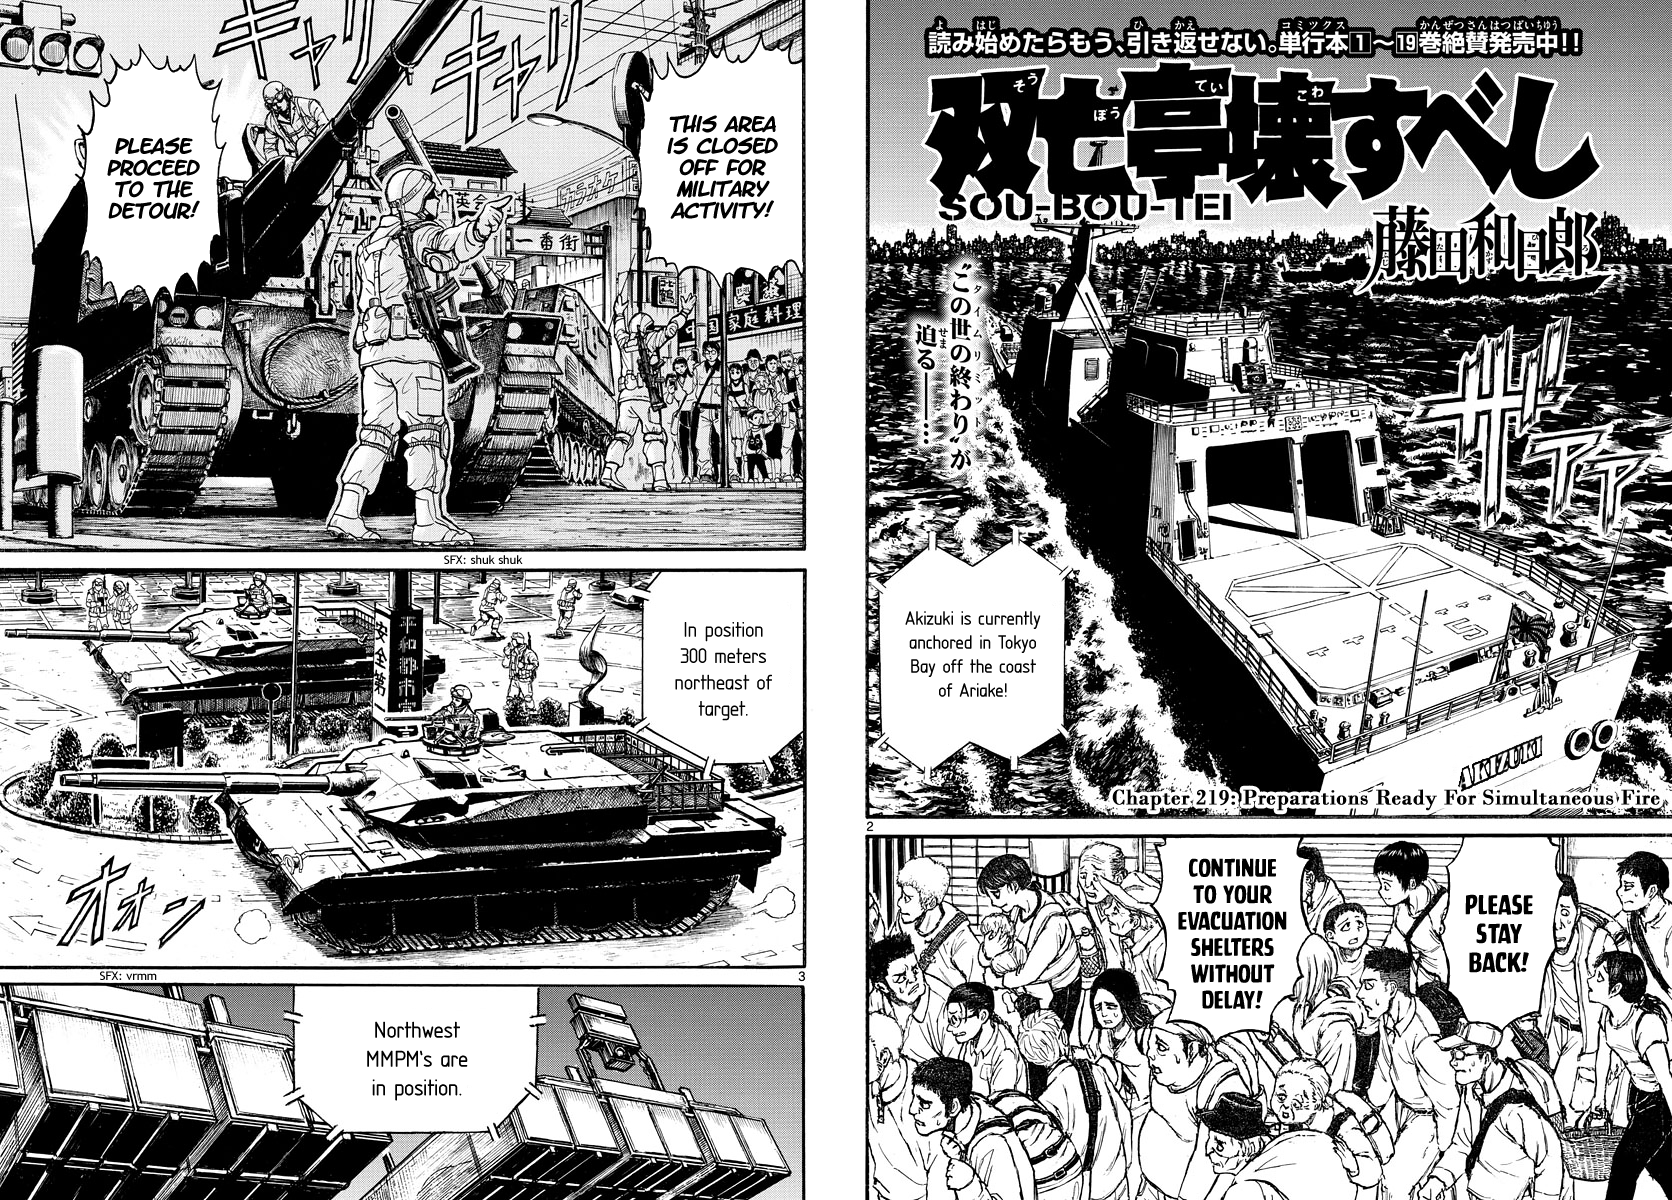 Souboutei Kowasu Beshi Vol.23 Chapter 219: Preparations Ready For Simultaneous Fire - Picture 2